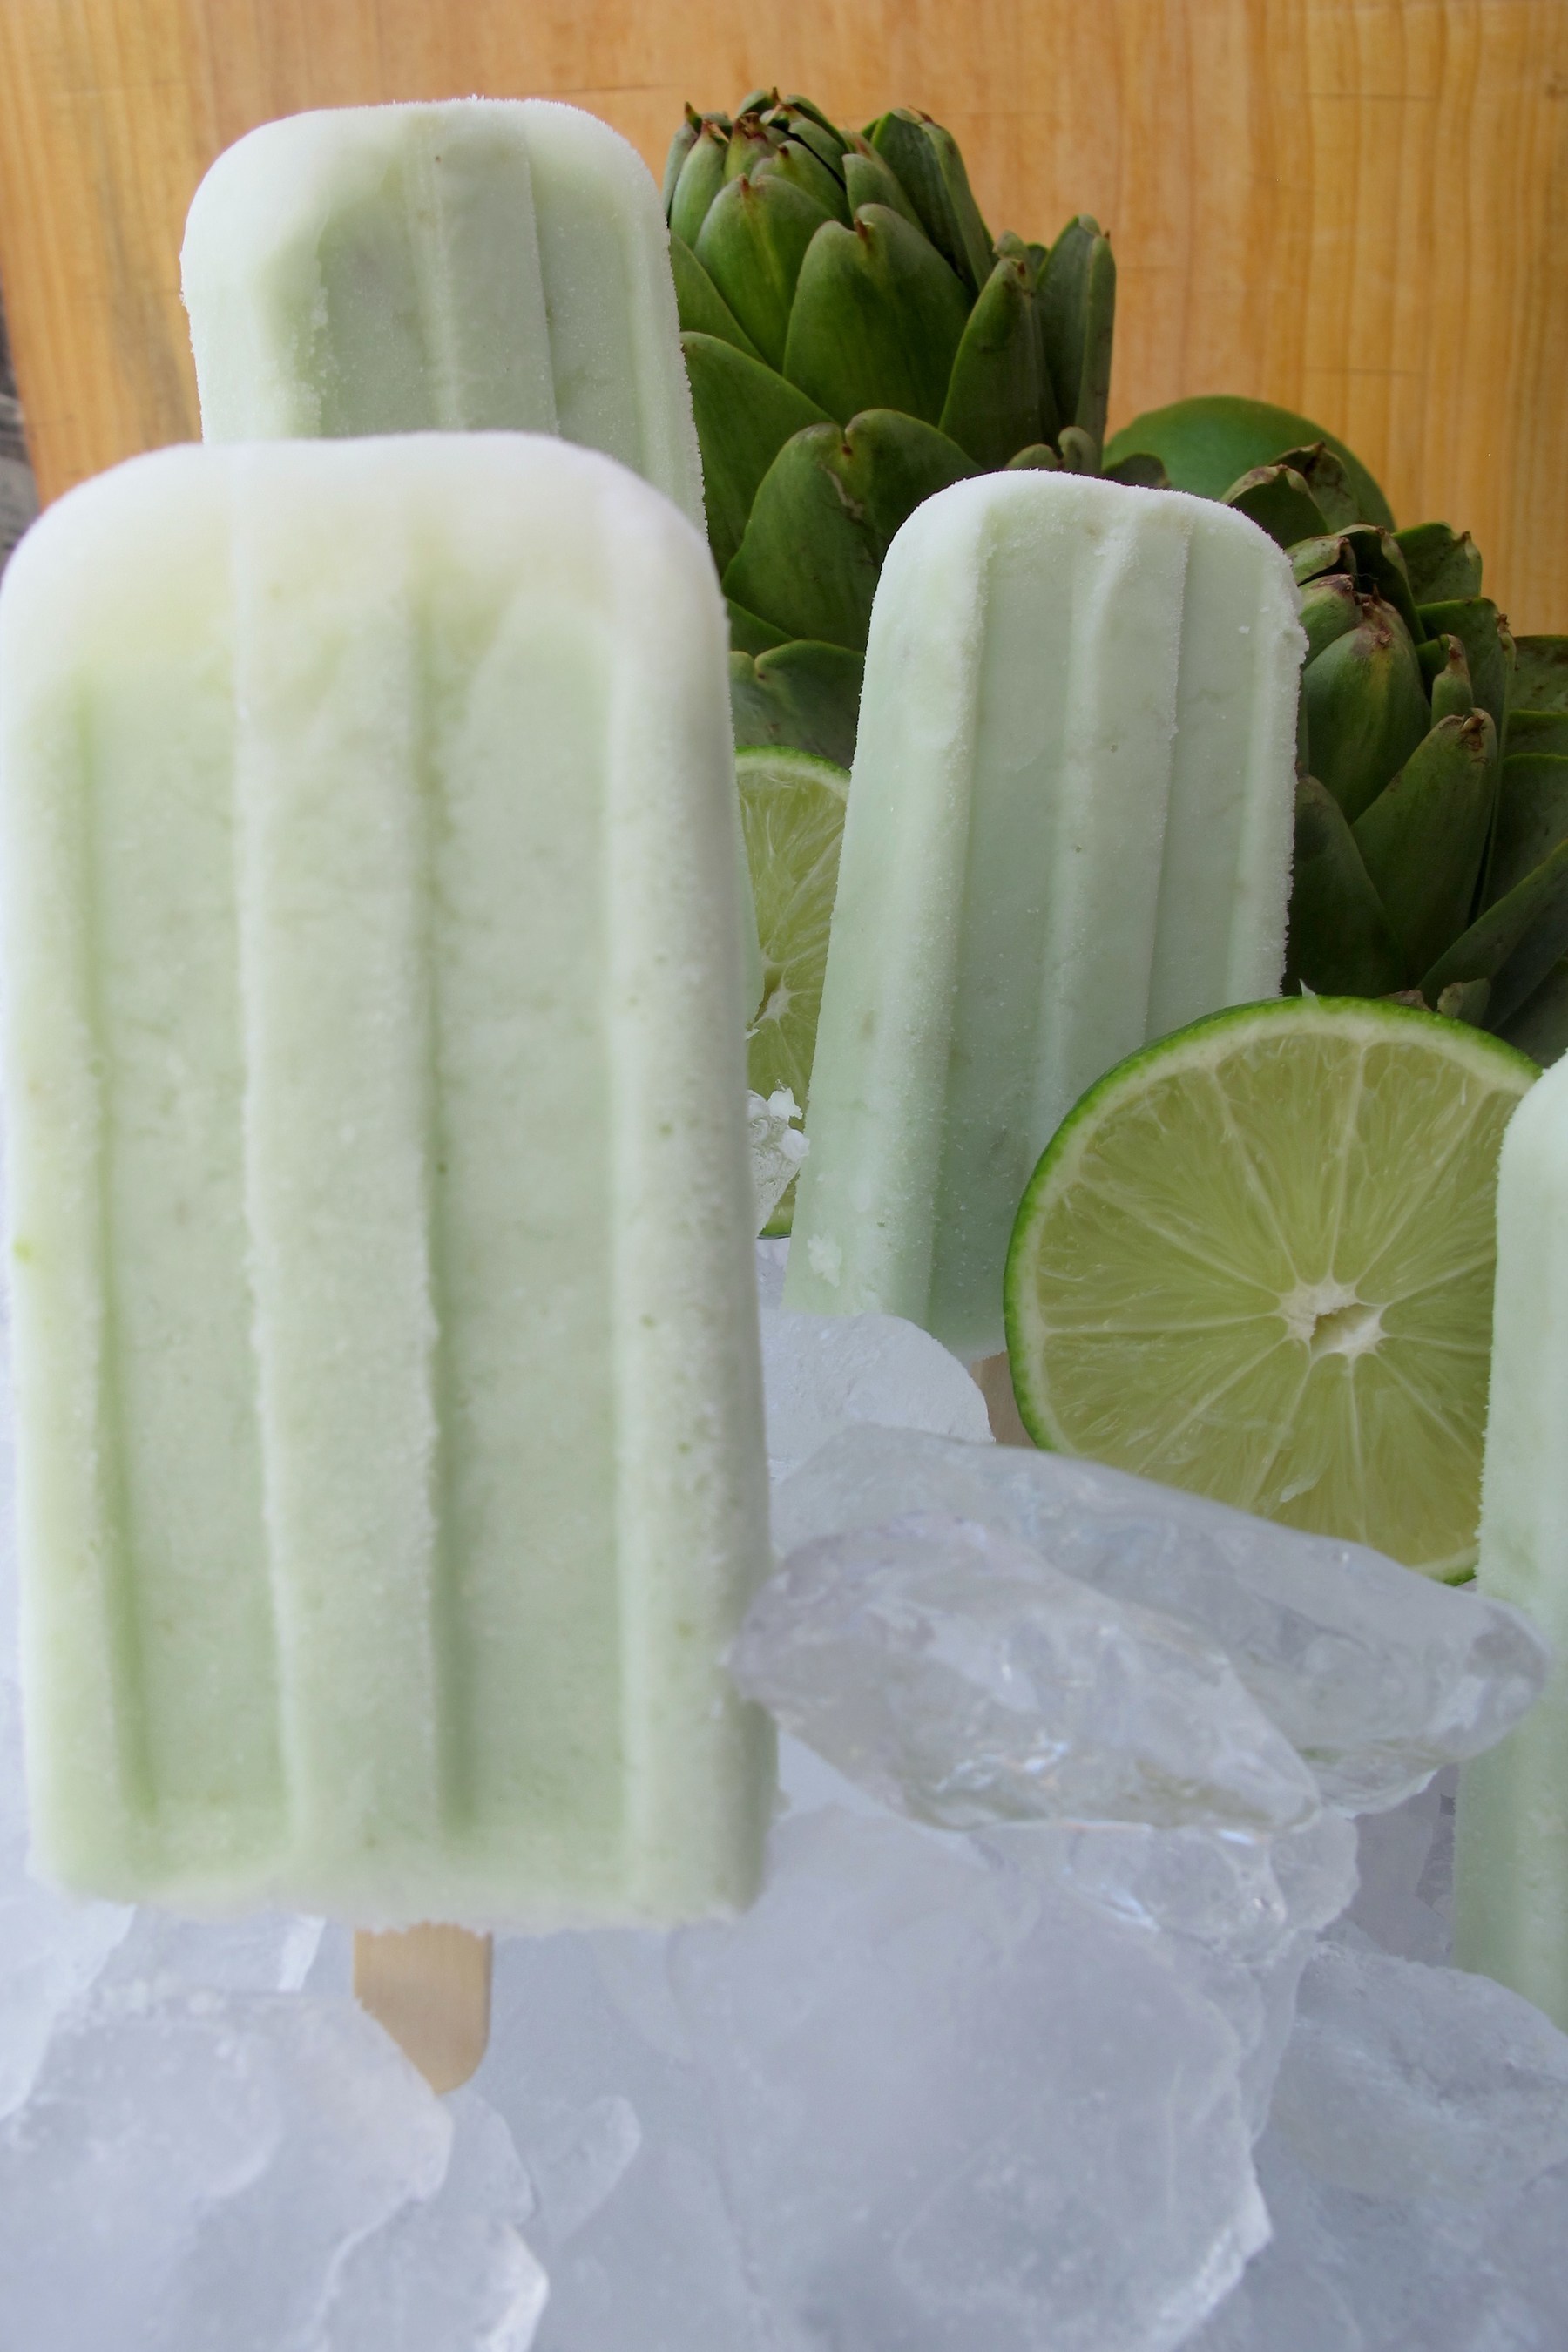 Lime ice pops with artichoke